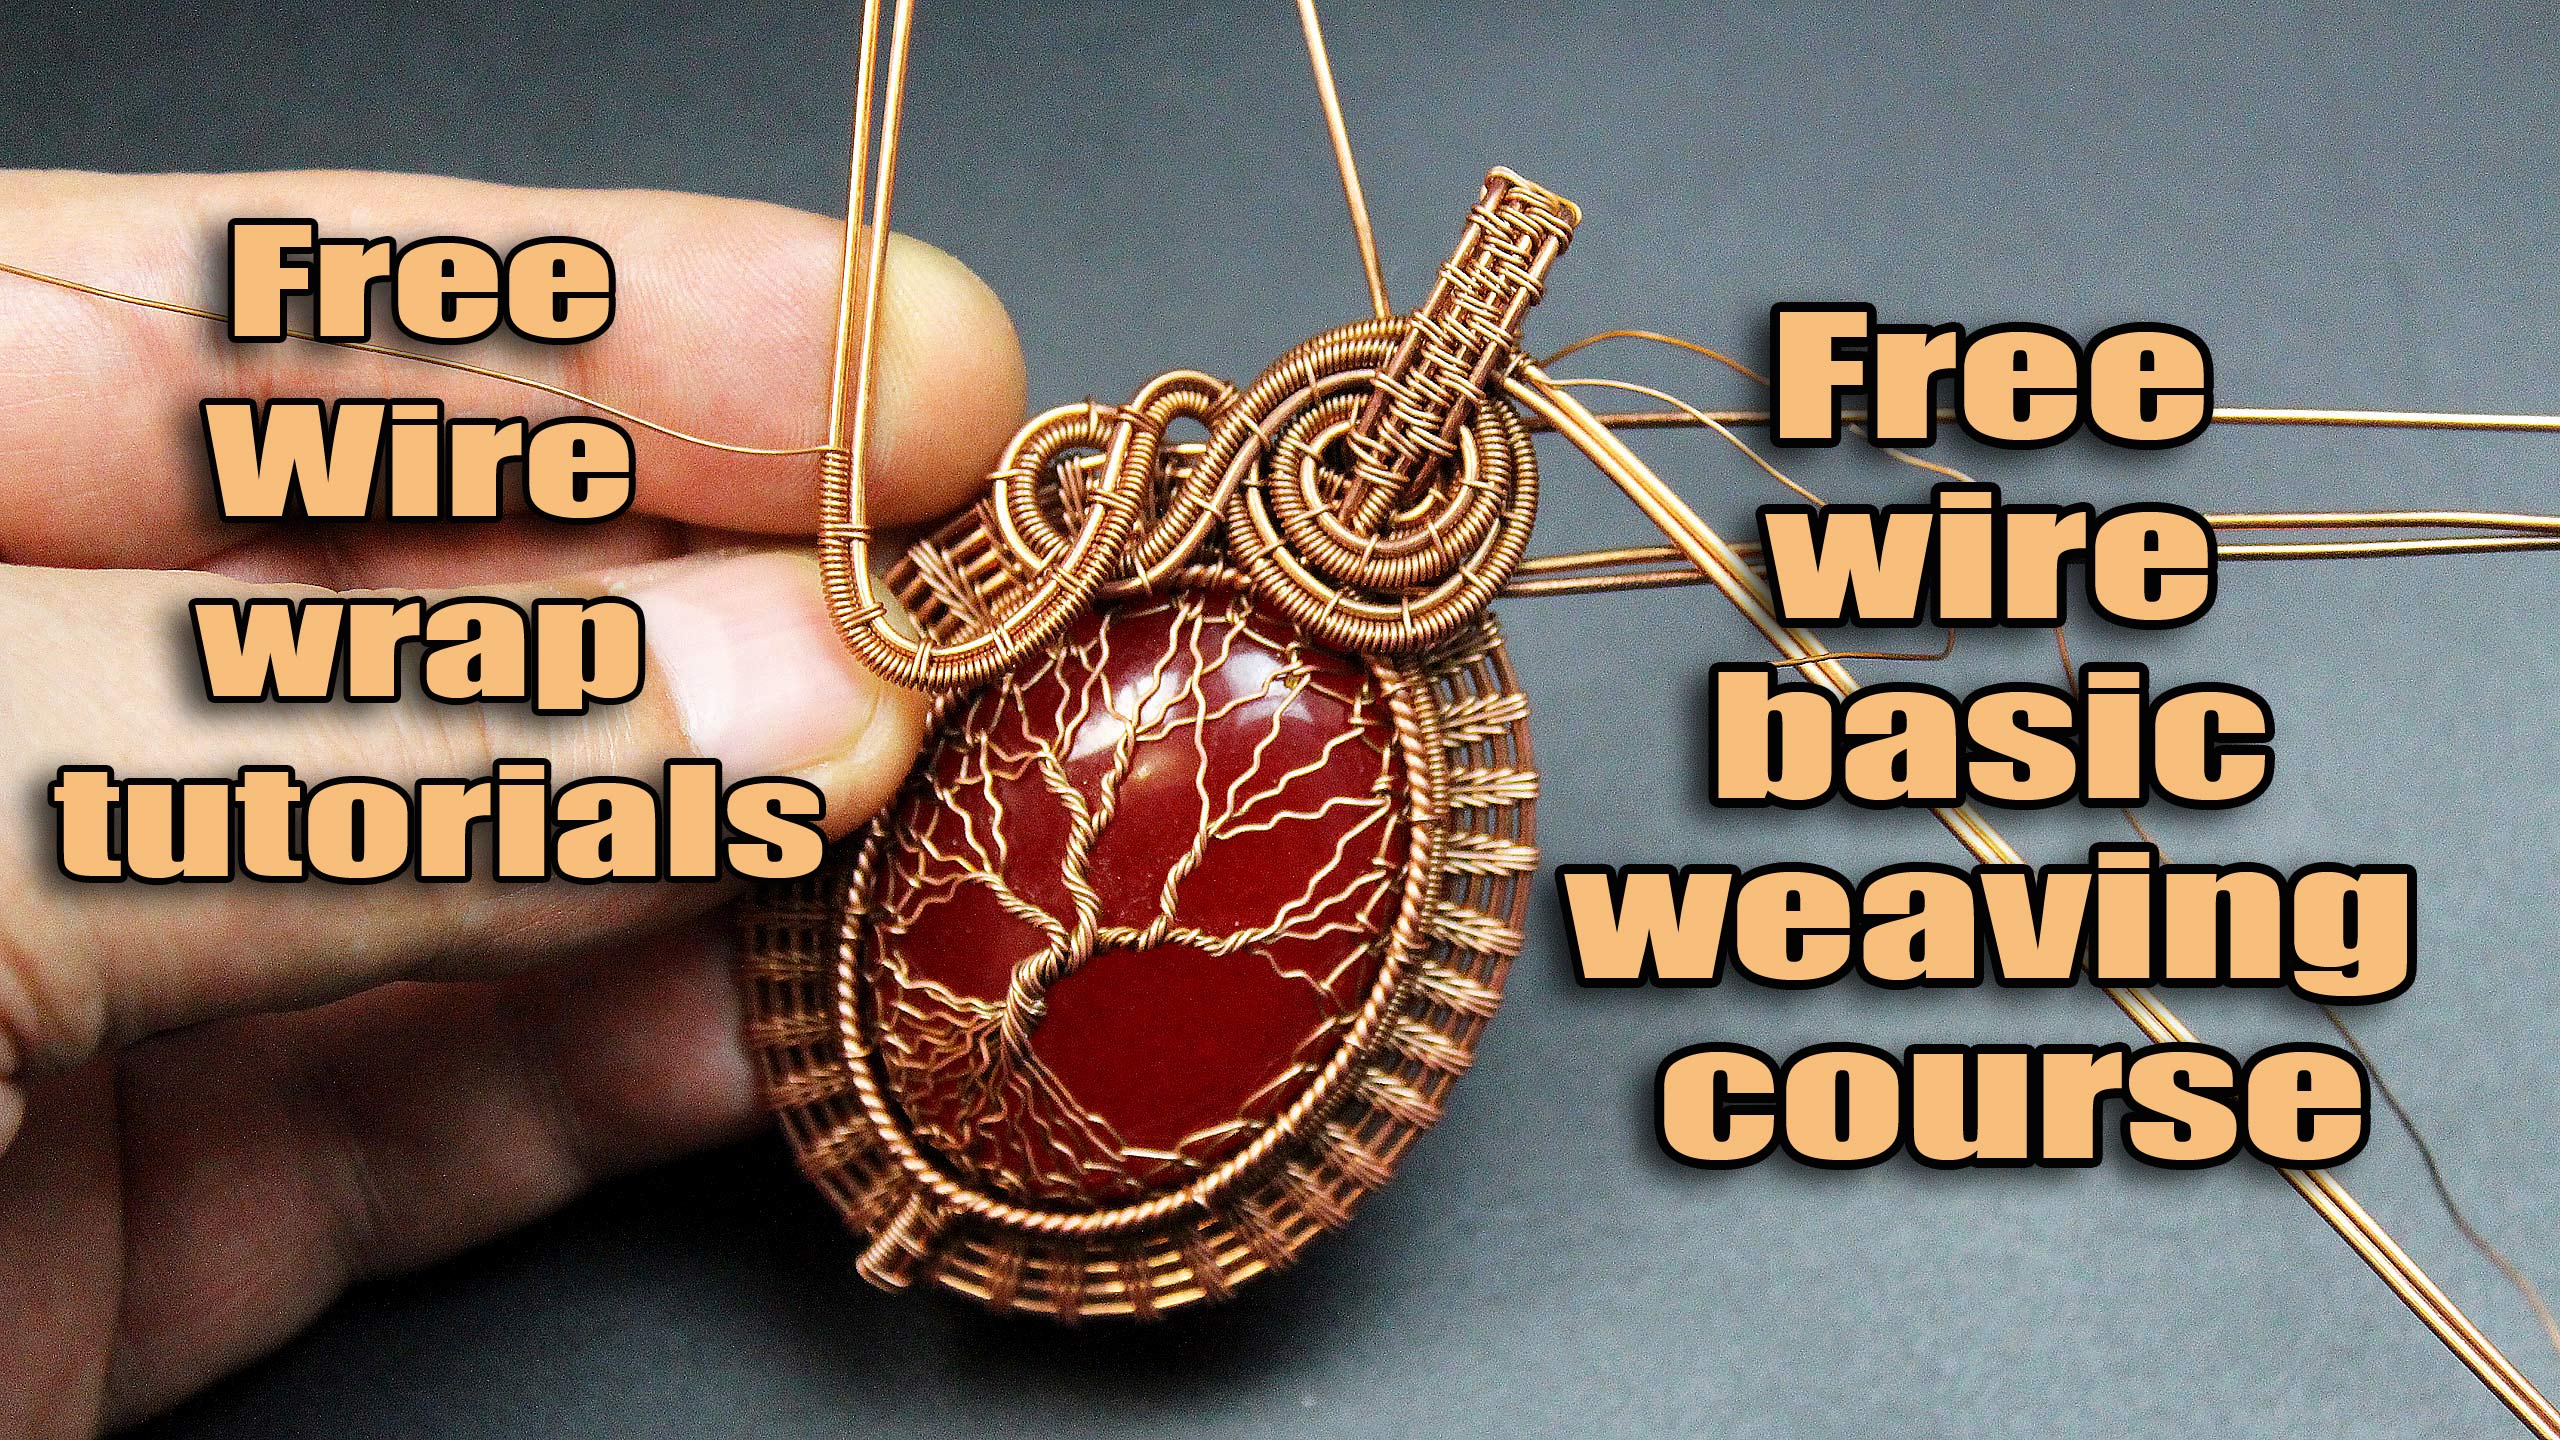 Wire Wrapping for Beginners Online Course - DIY Wire Wrap Video Tutorial,  Wire Weaving Tutorial, How to Wire Wrap Jewelry, Jewelry Making